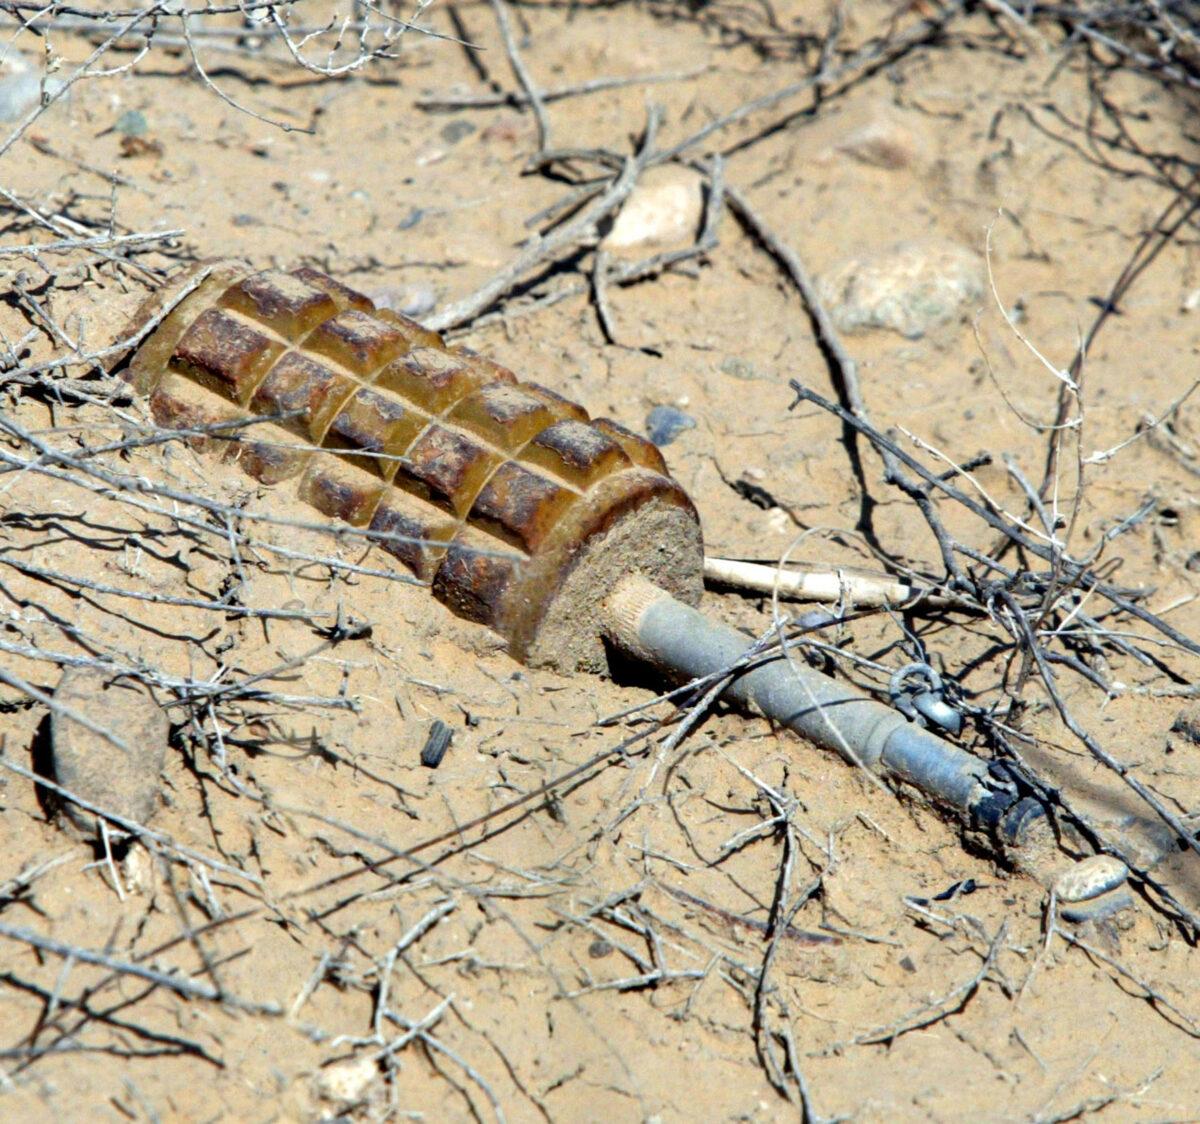 An antipersonnel mine in Afghanistan in a file photograph. (Joe Raedle/Getty Images)